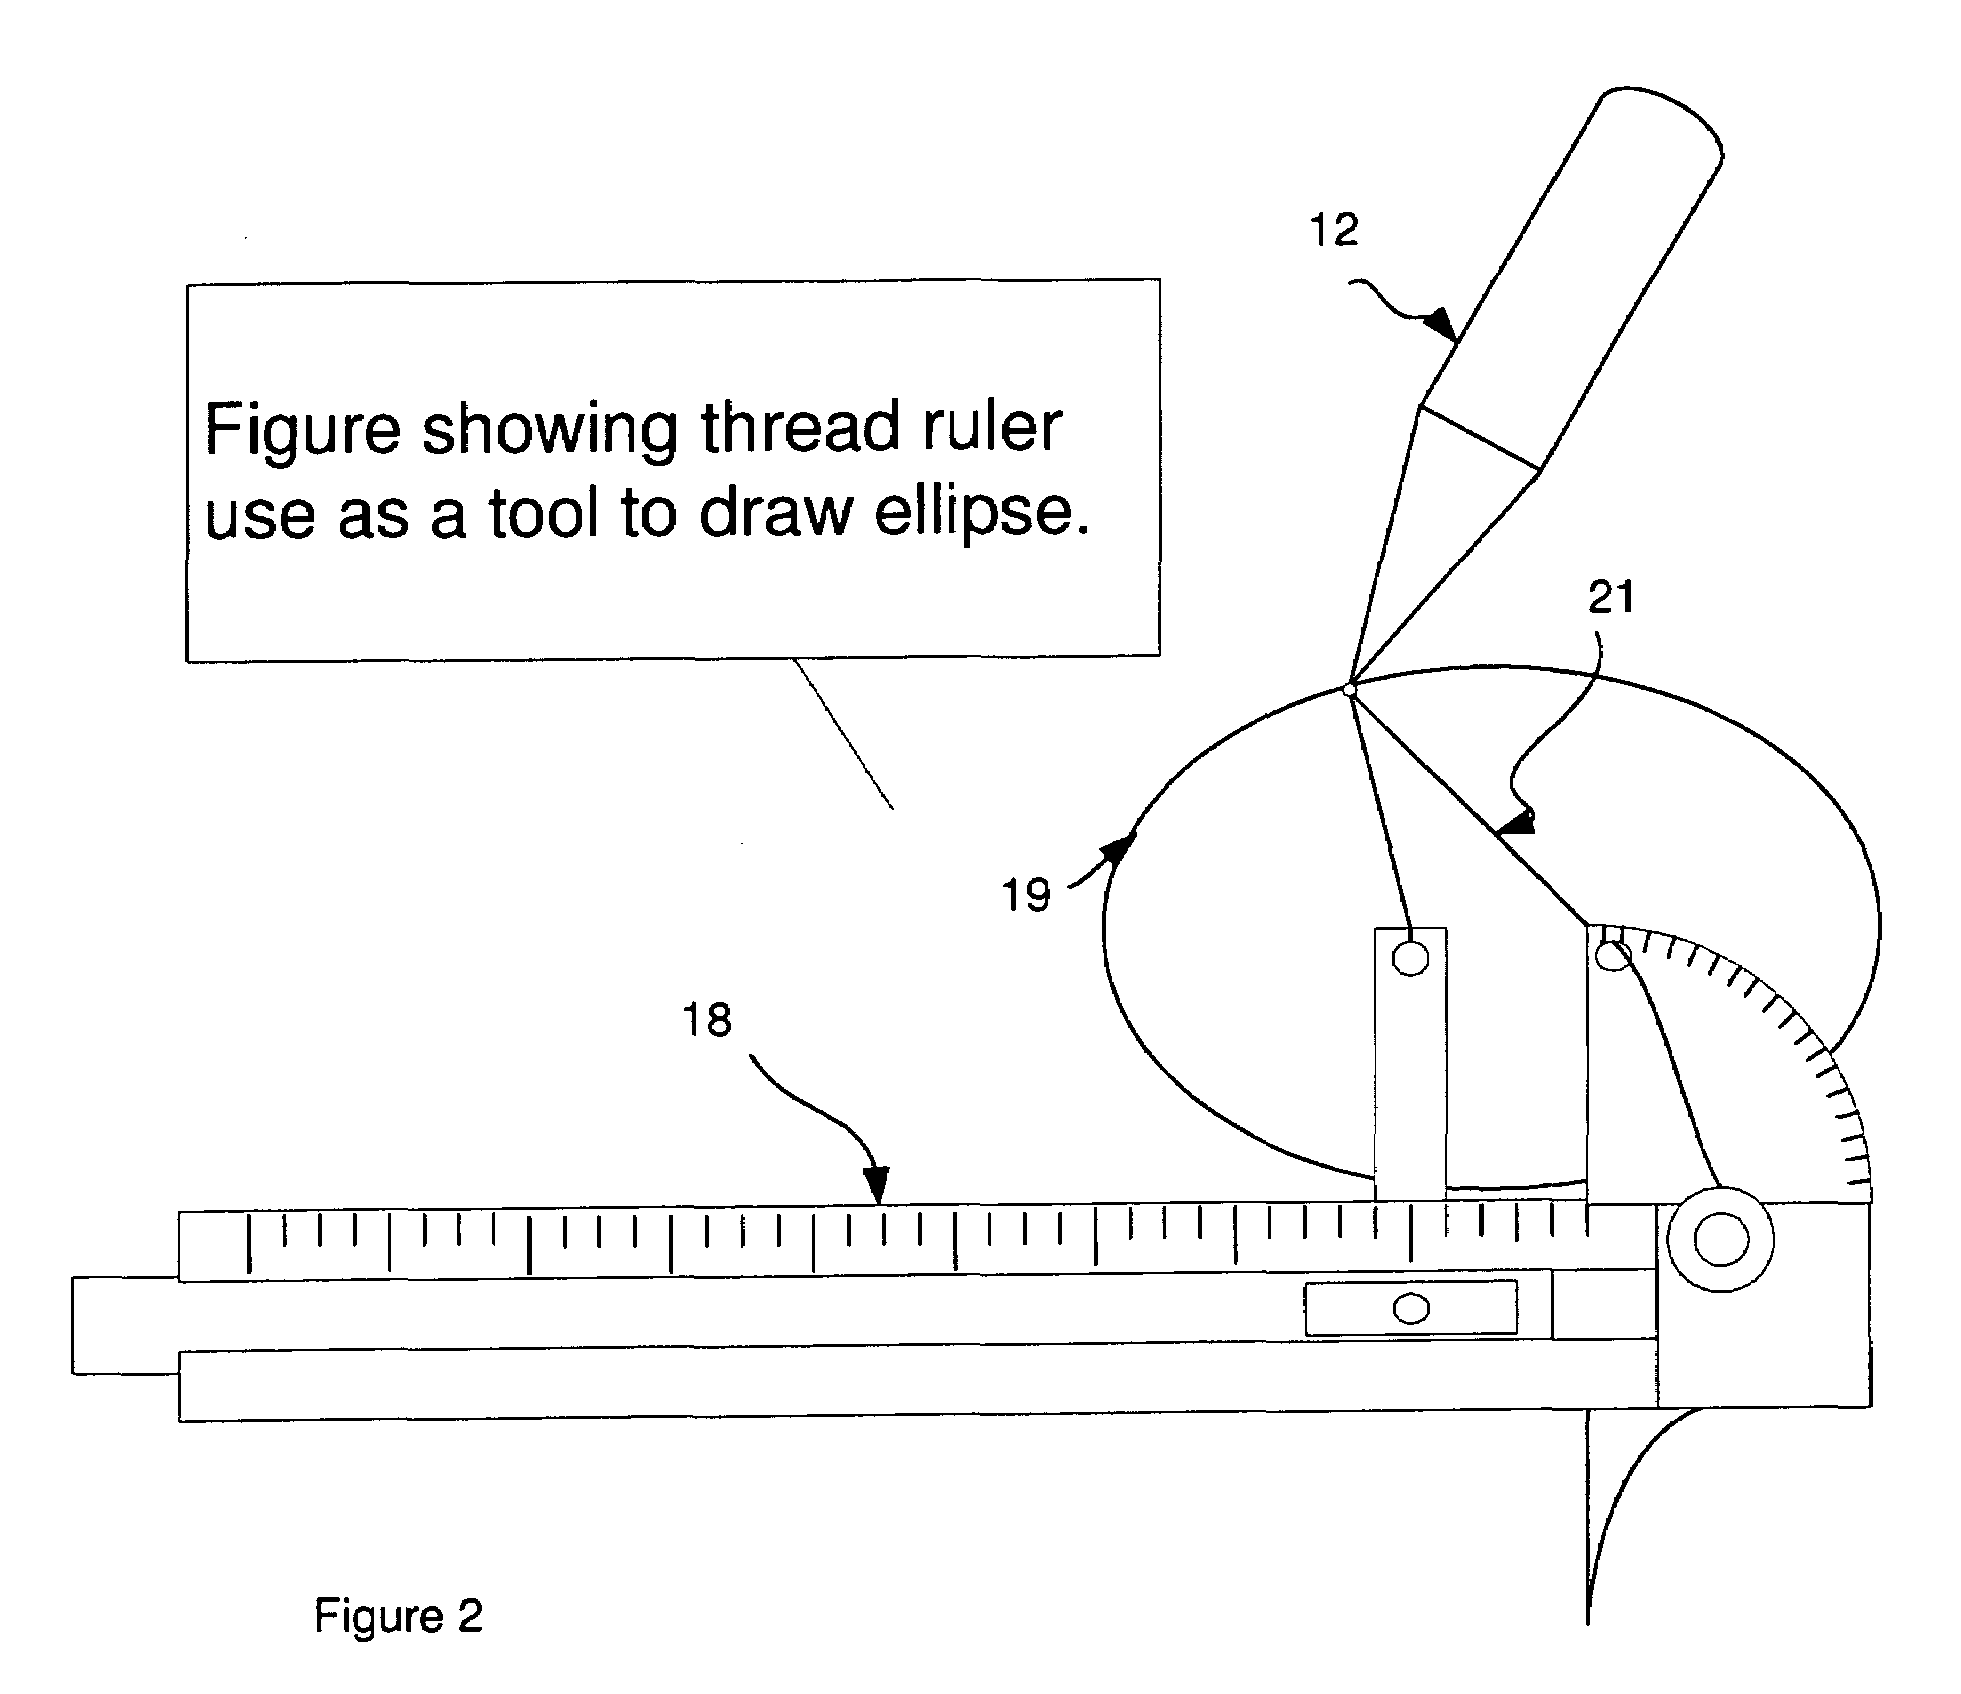 Thread ruler and a multi-function drafting instrument